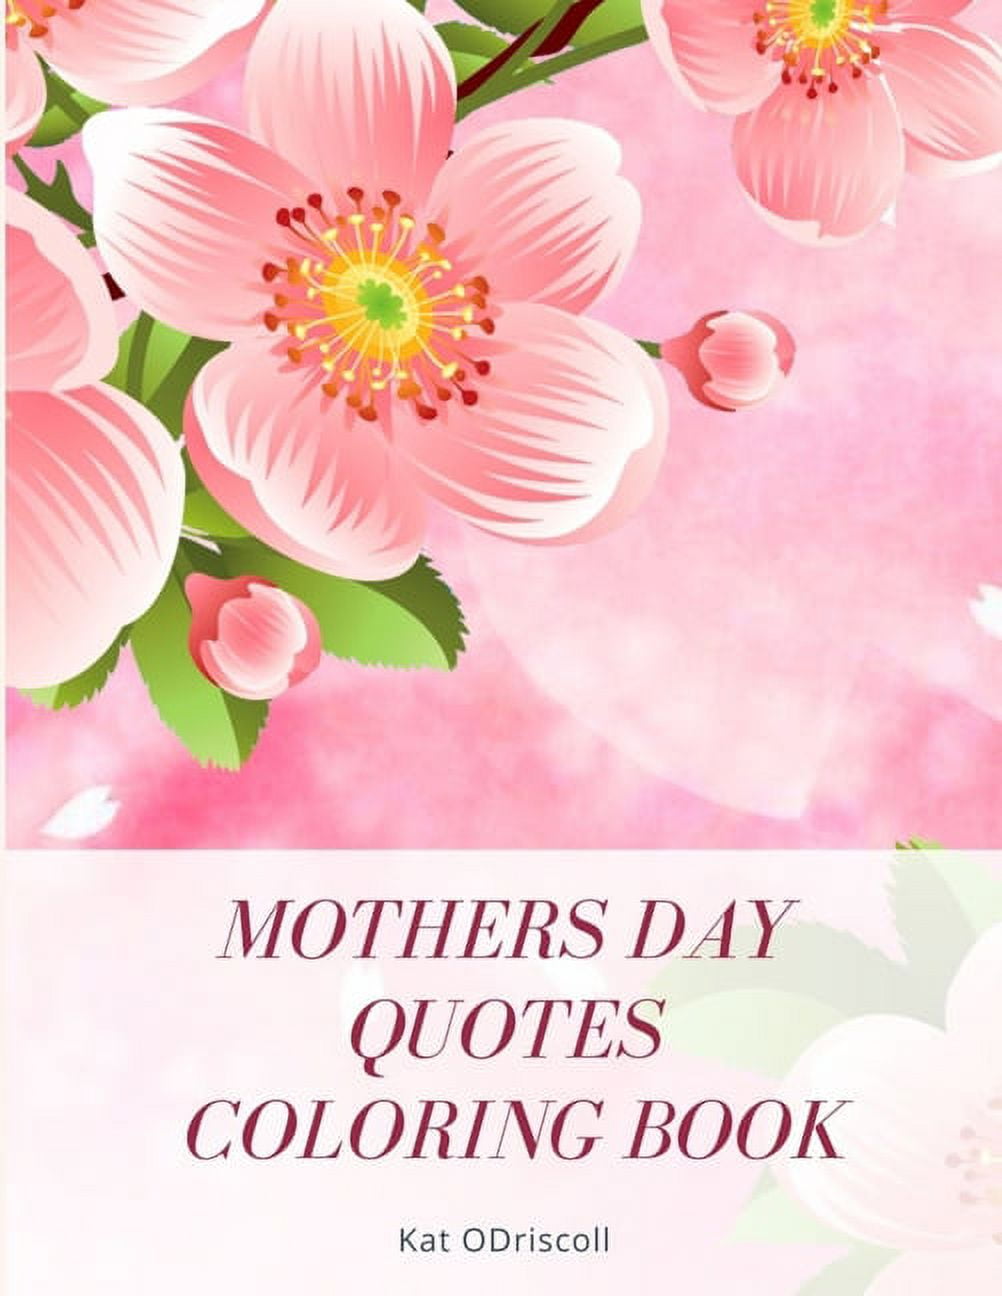 Best Happy Mother's Day Messages and Quotes for Friends - Lola Lambchops